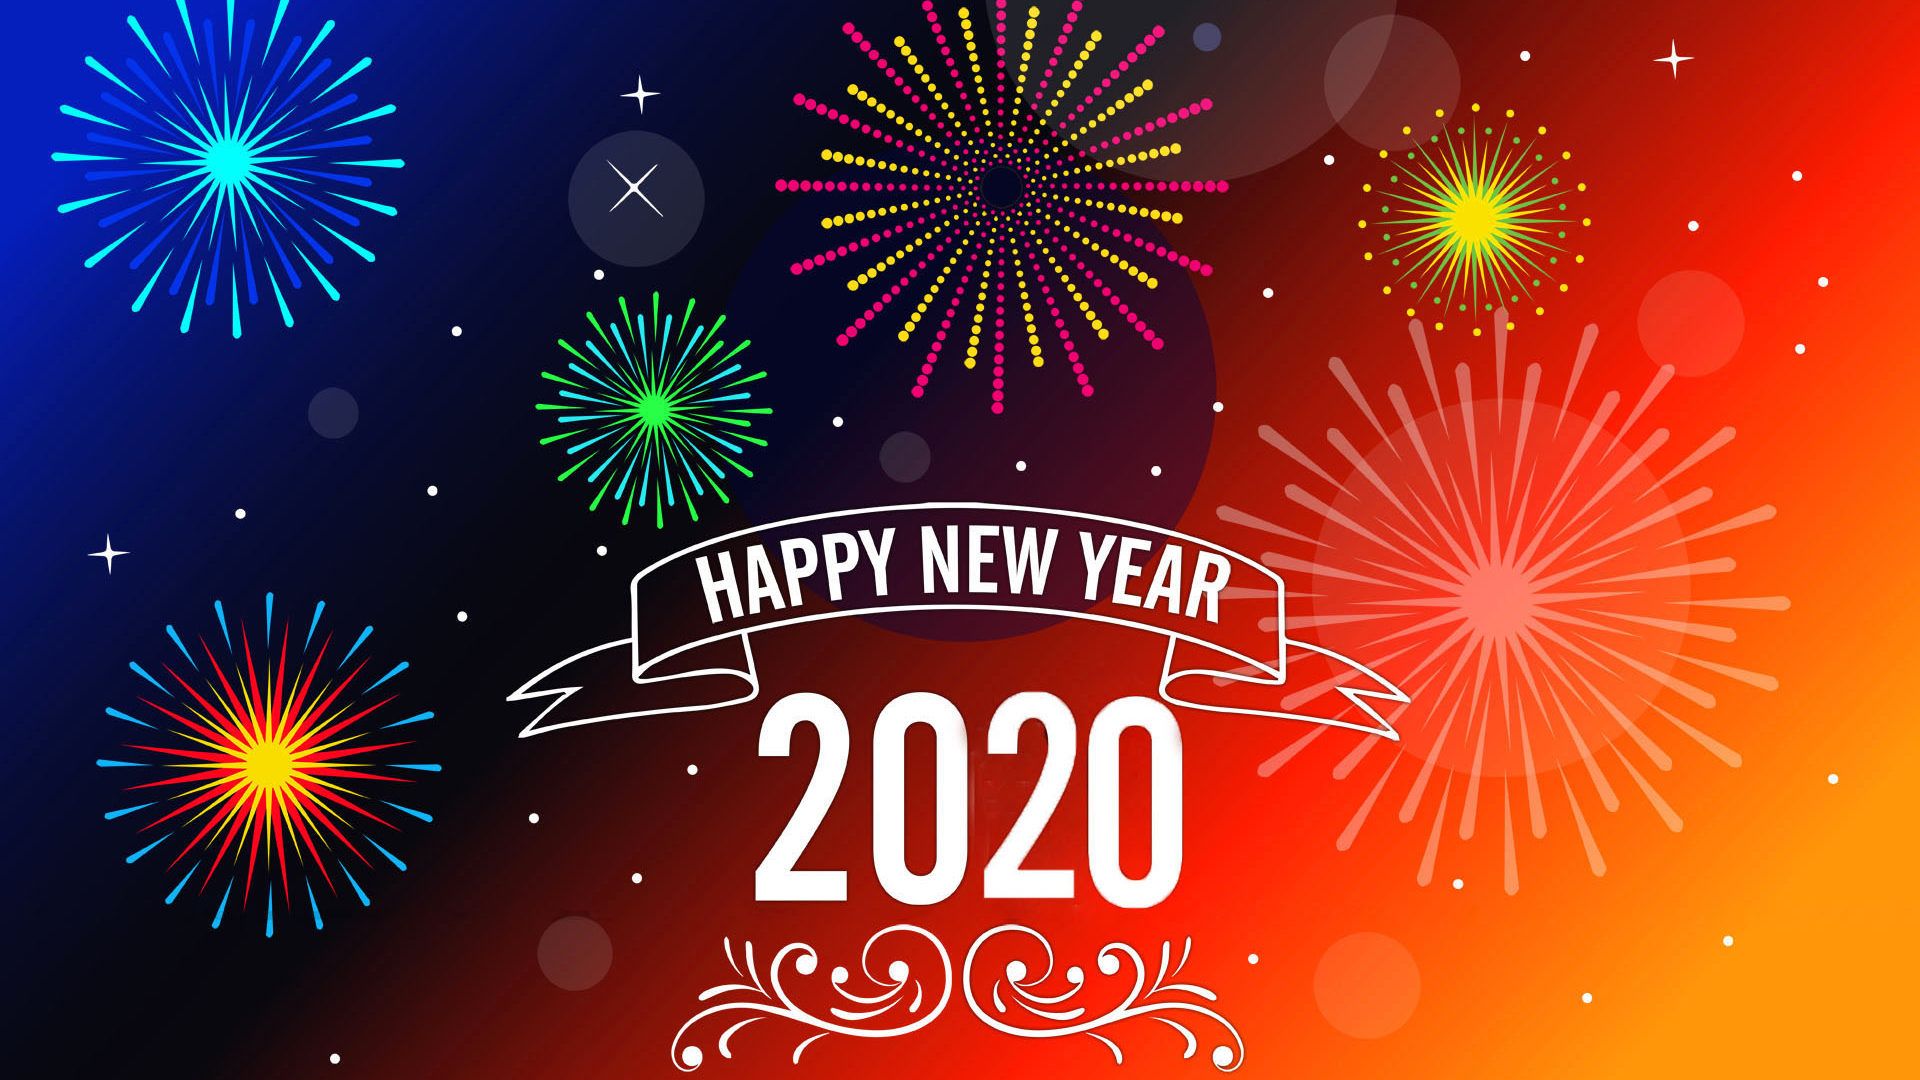 Happy New Year 2020 Wallpapers 30 images   WallpaperBoat